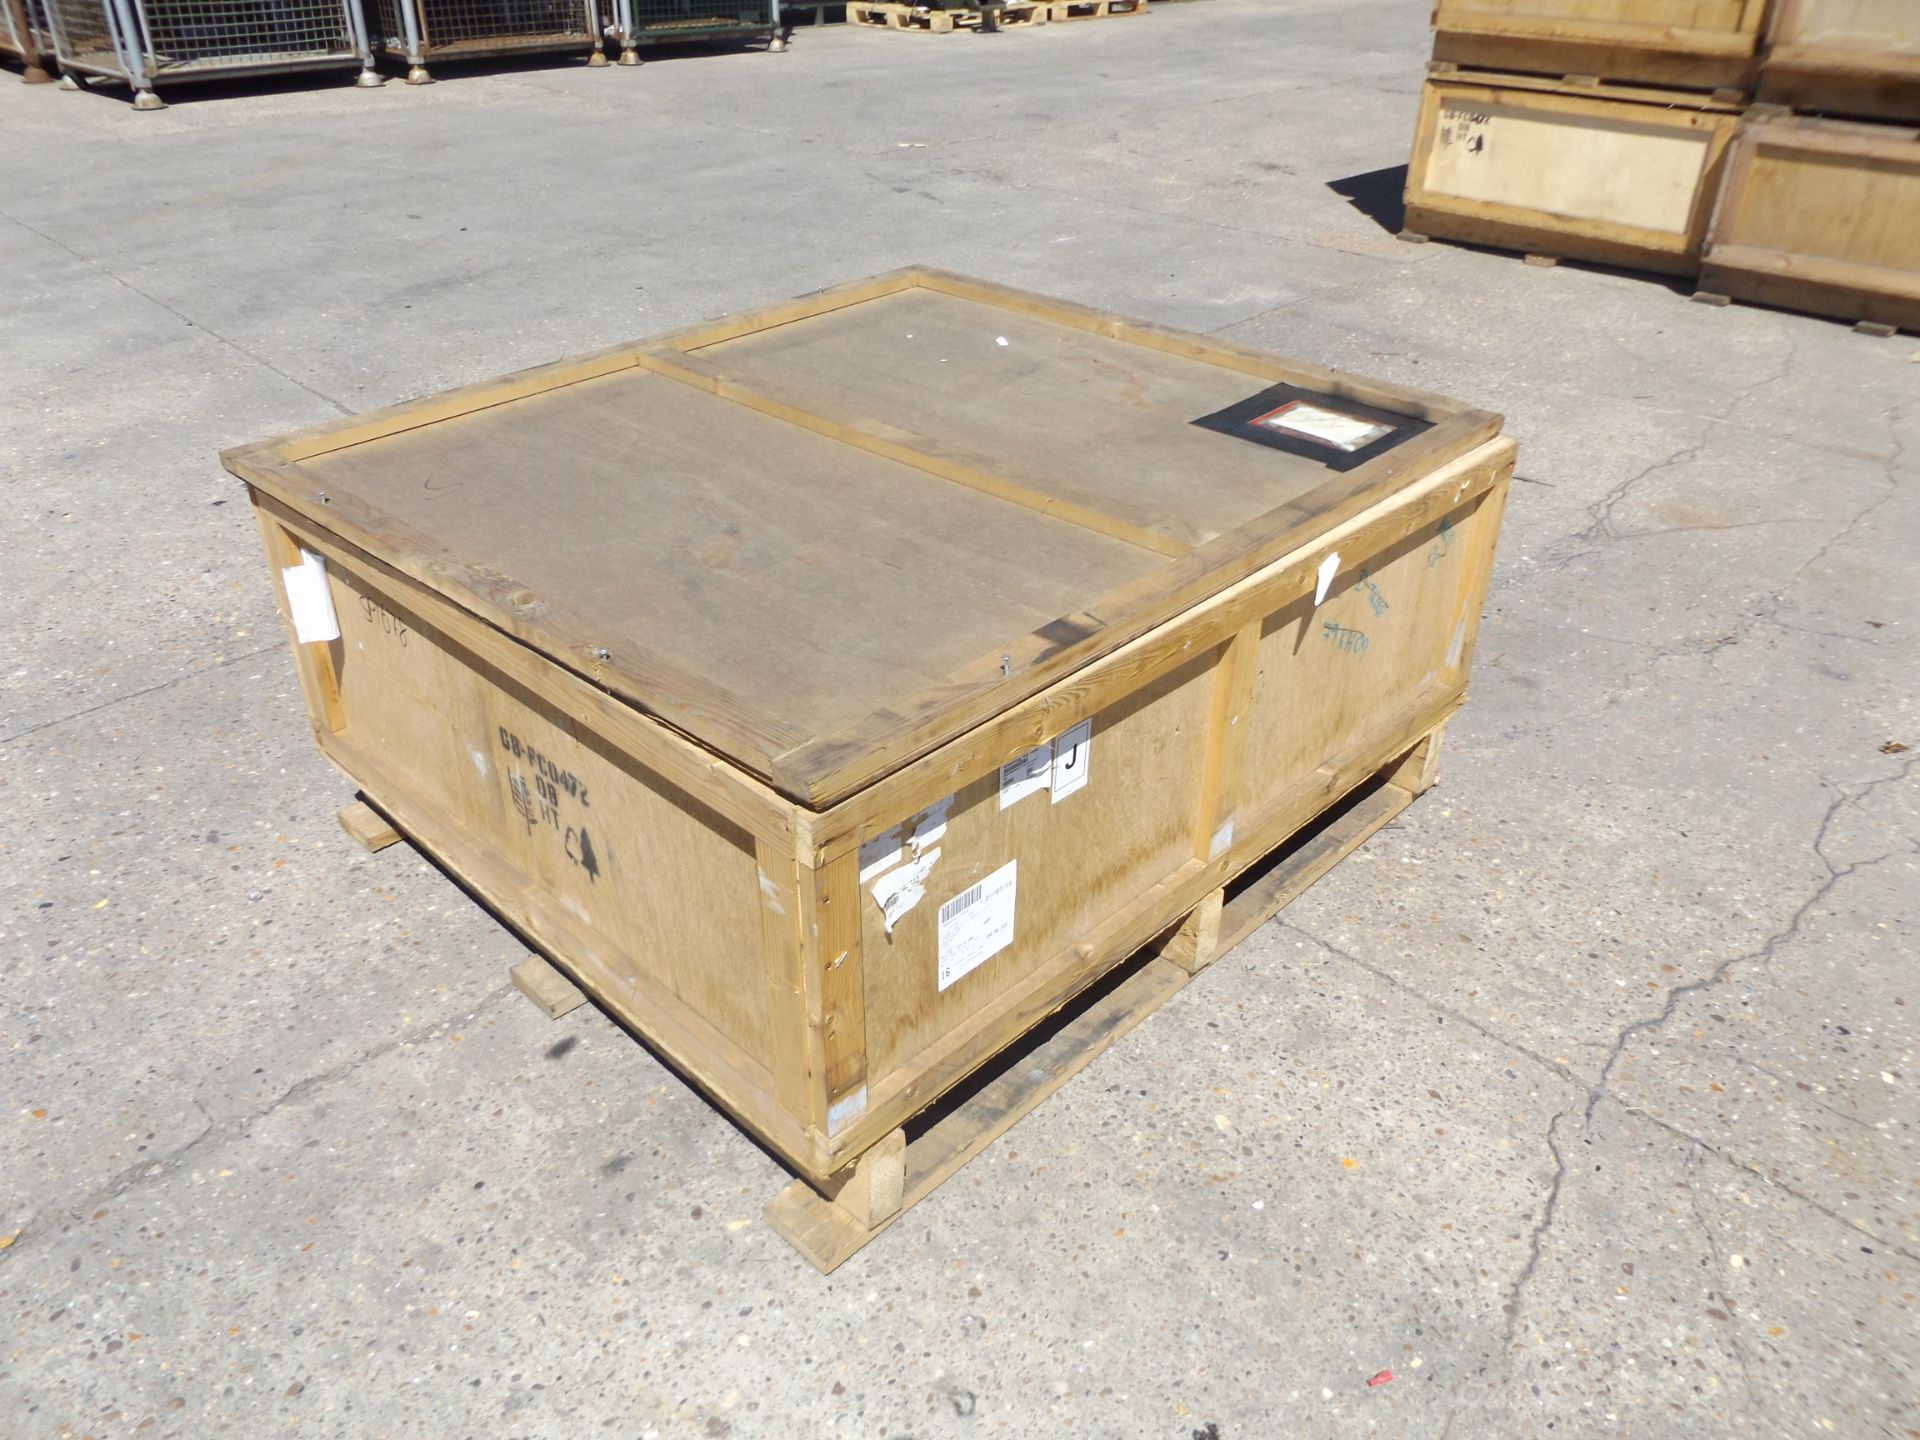 10 x Large Wooden Packing Crates - Image 2 of 3